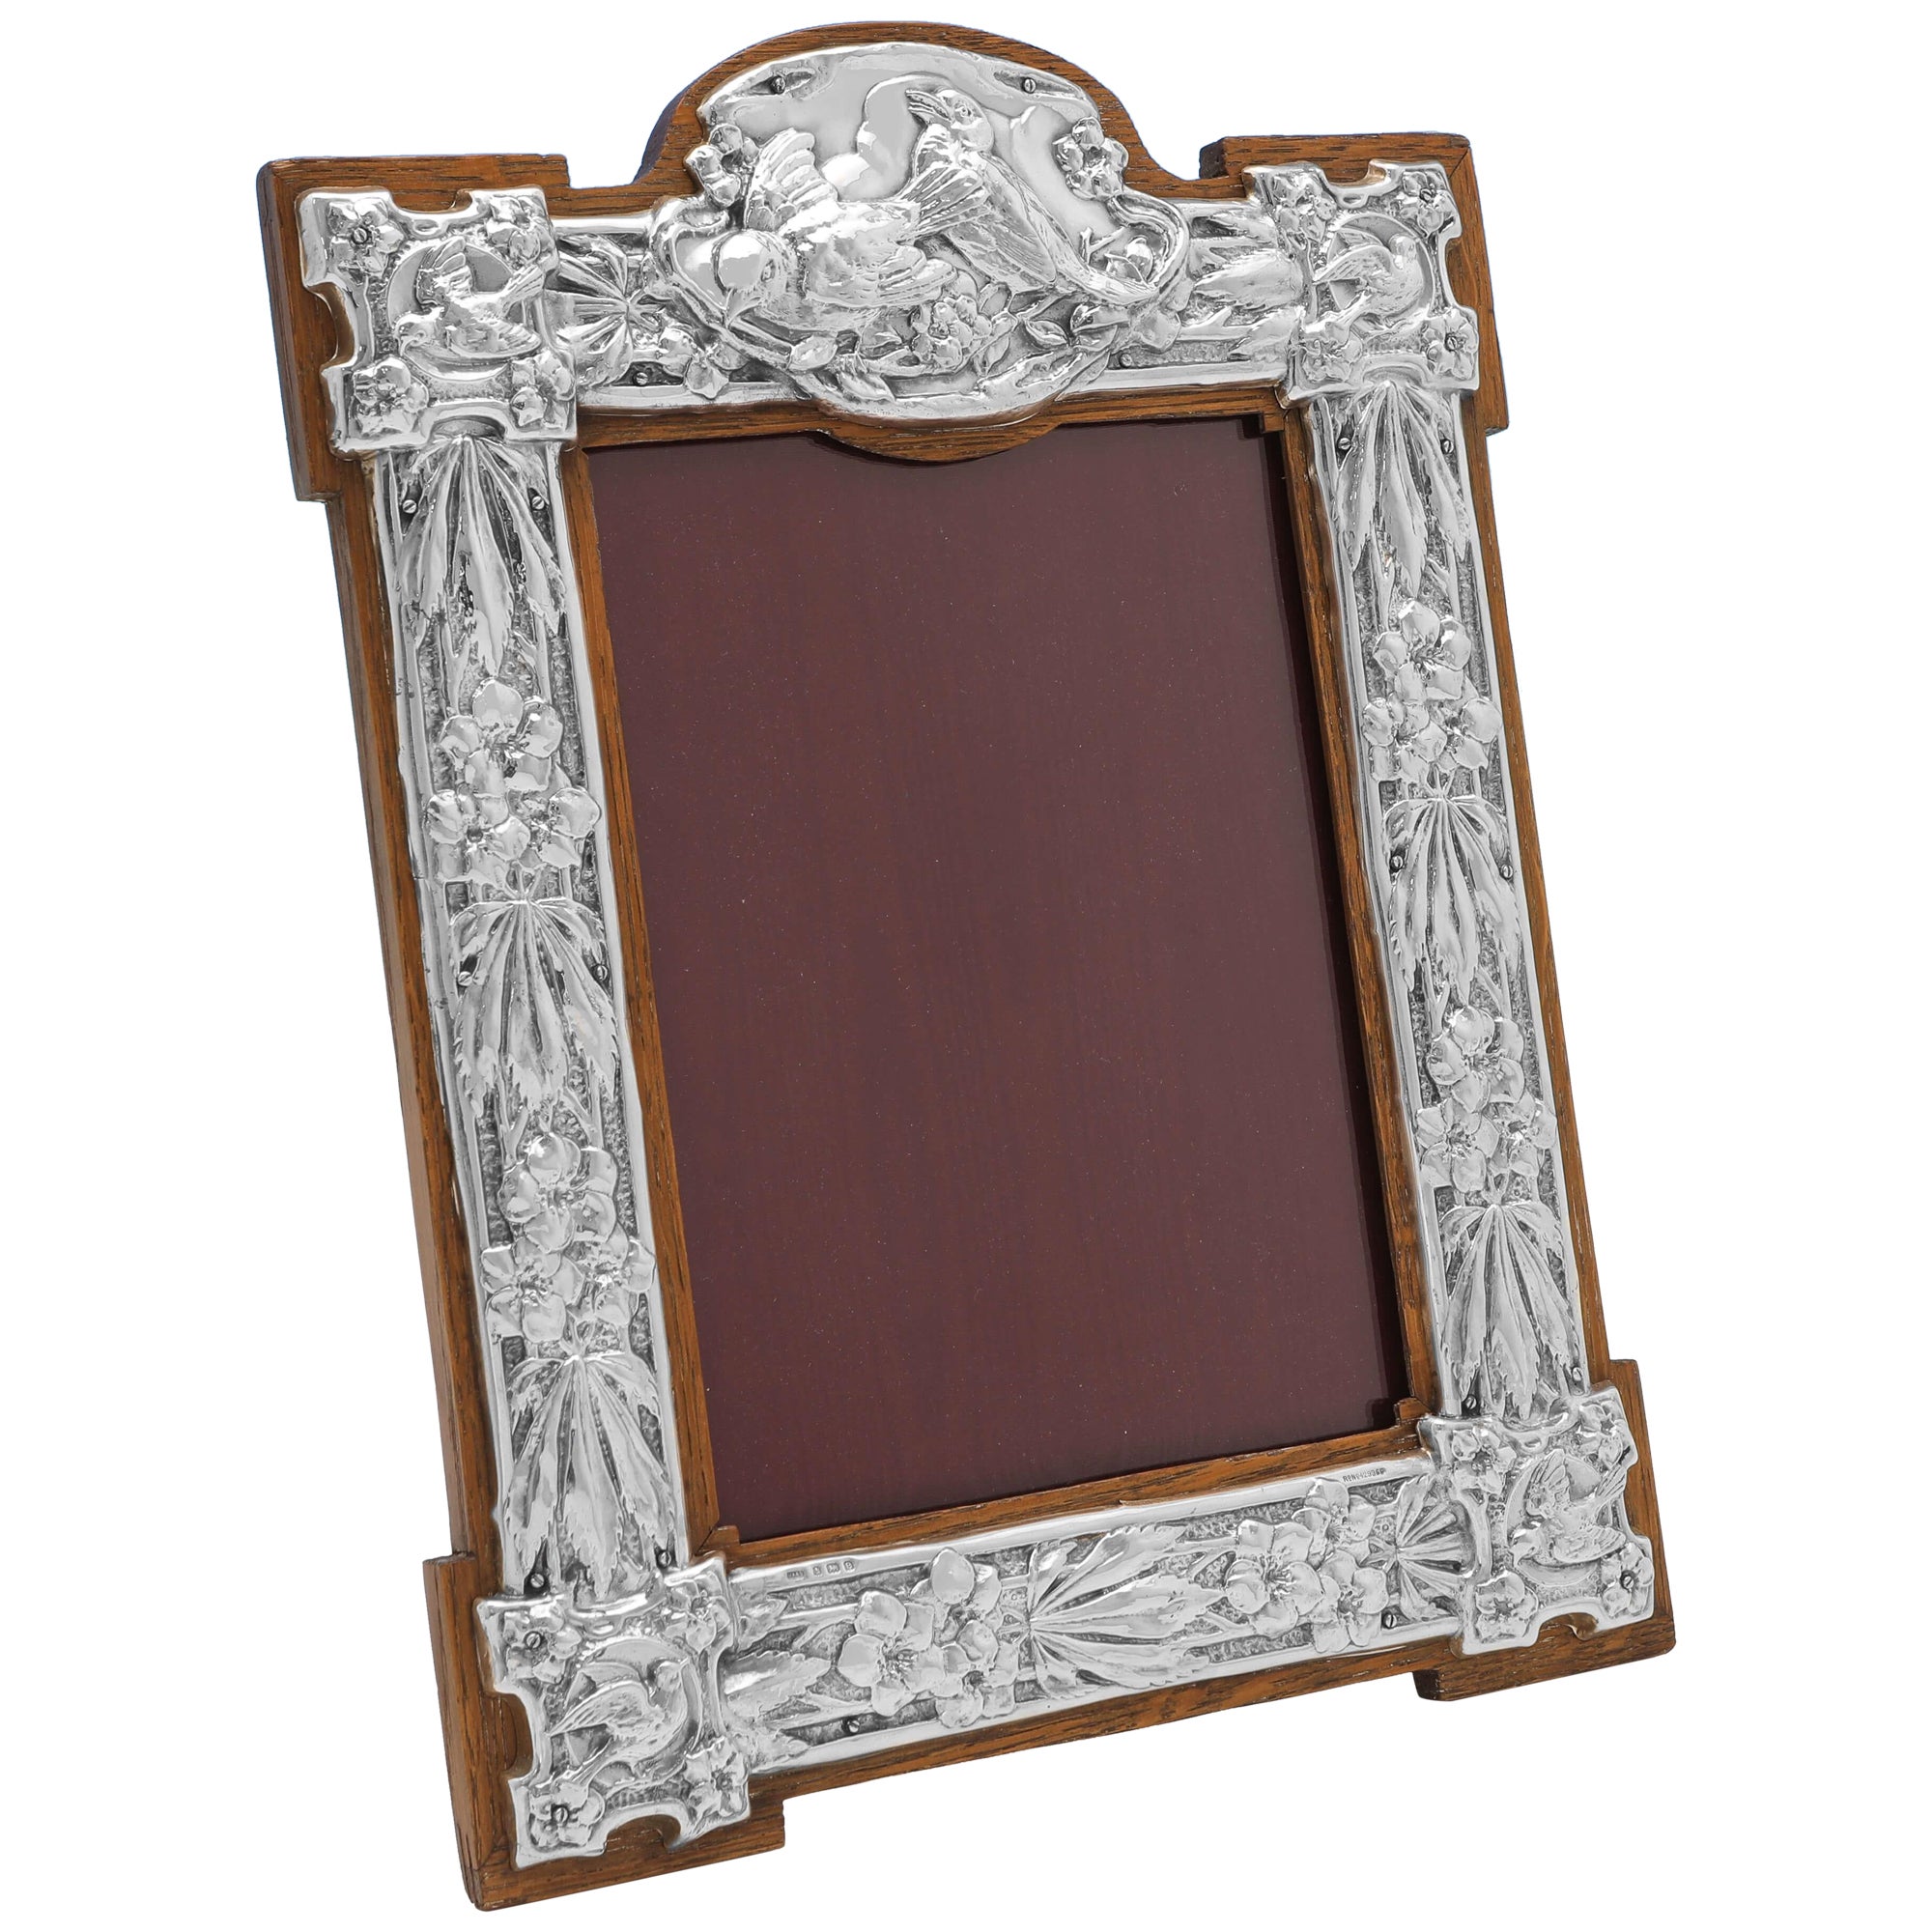 Wonderful & Large Art Nouveau Period Sterling Silver Photo Frame - 1904 For Sale